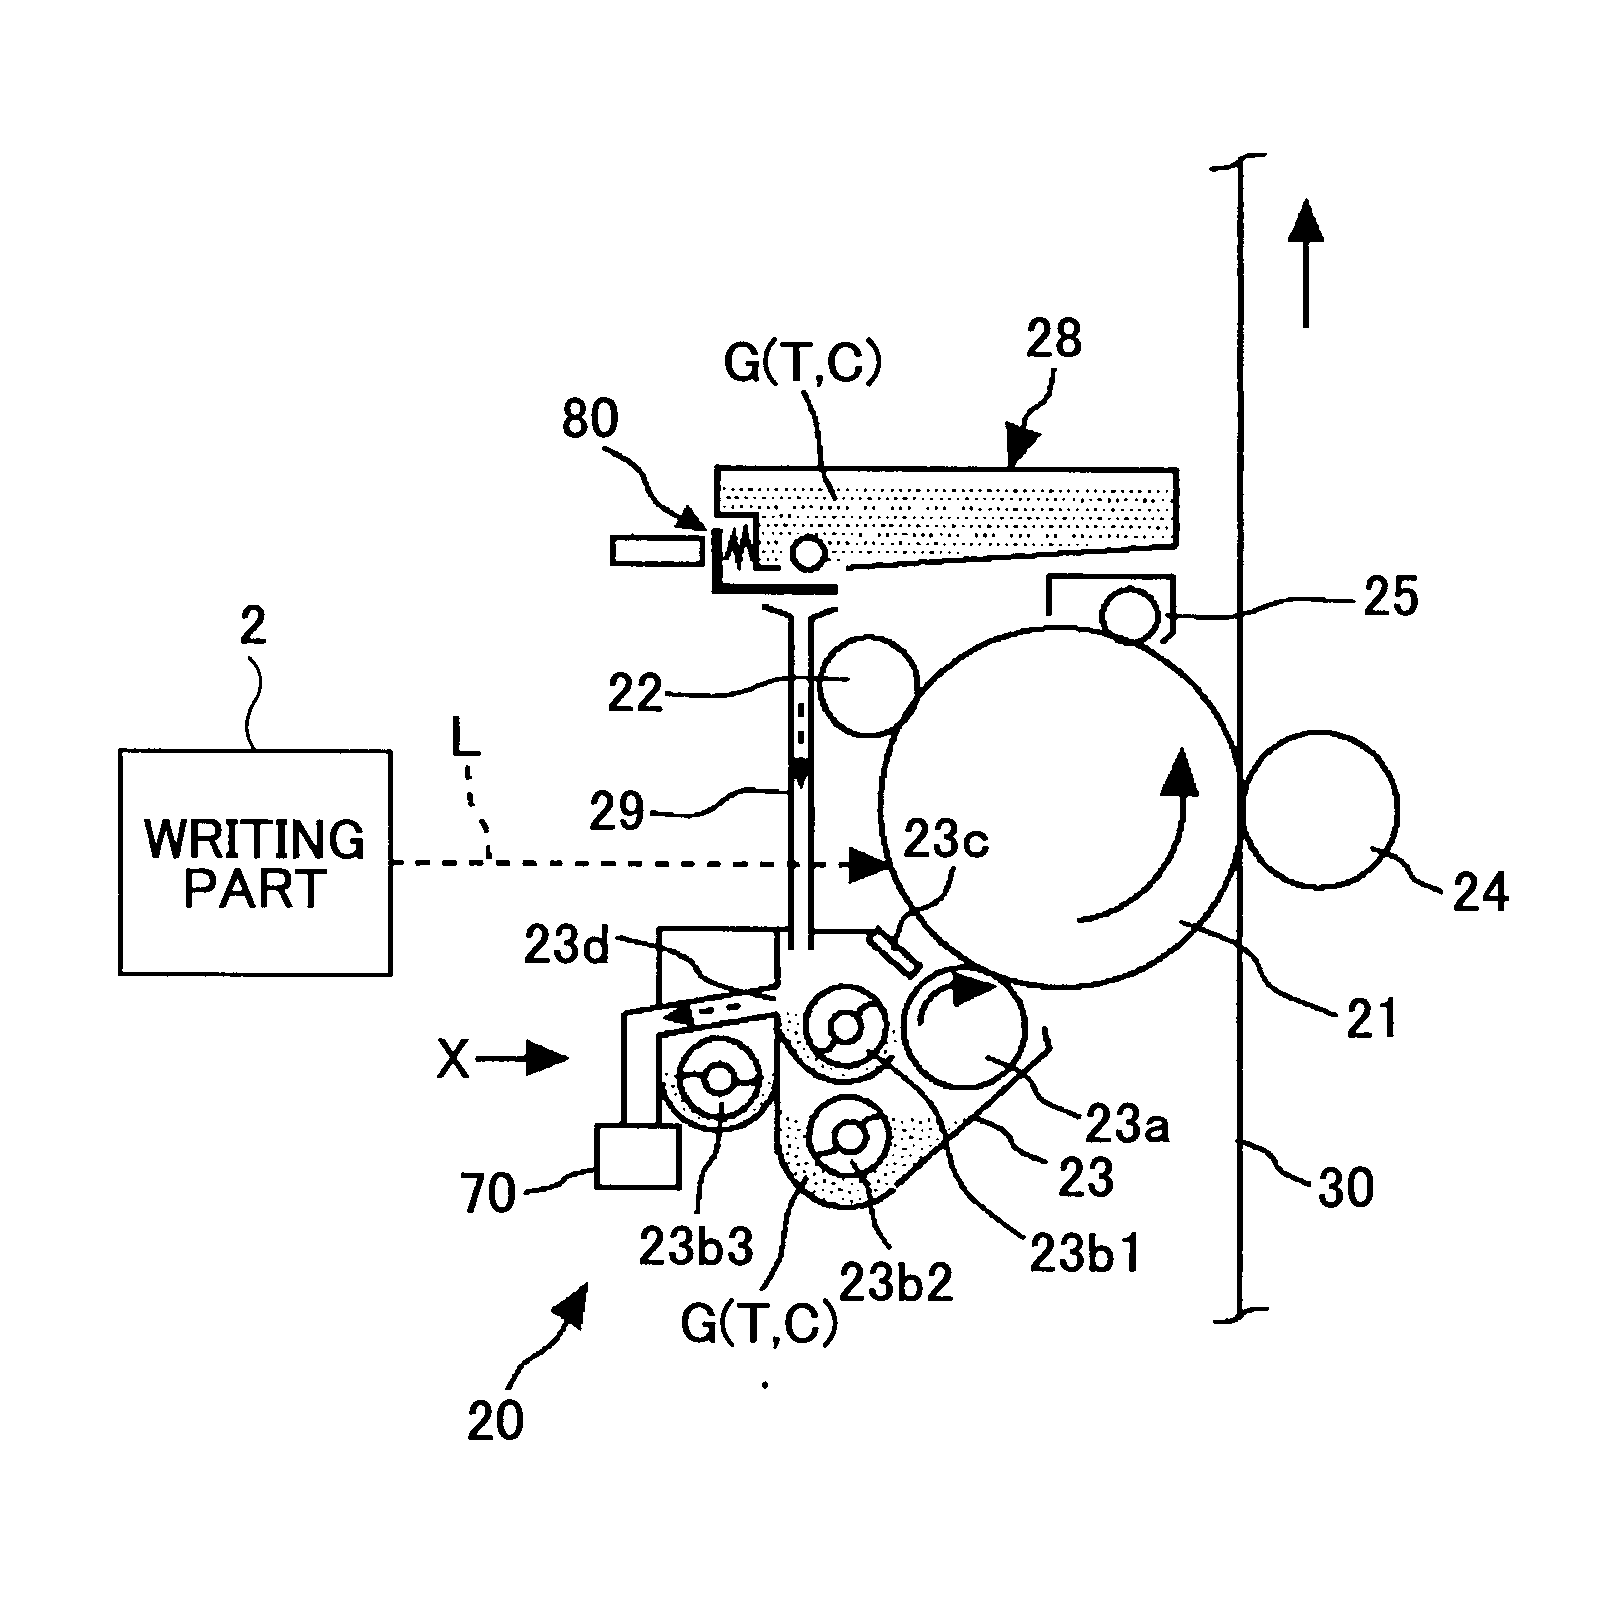 Developing unit, process cartridge, and image forming apparatus